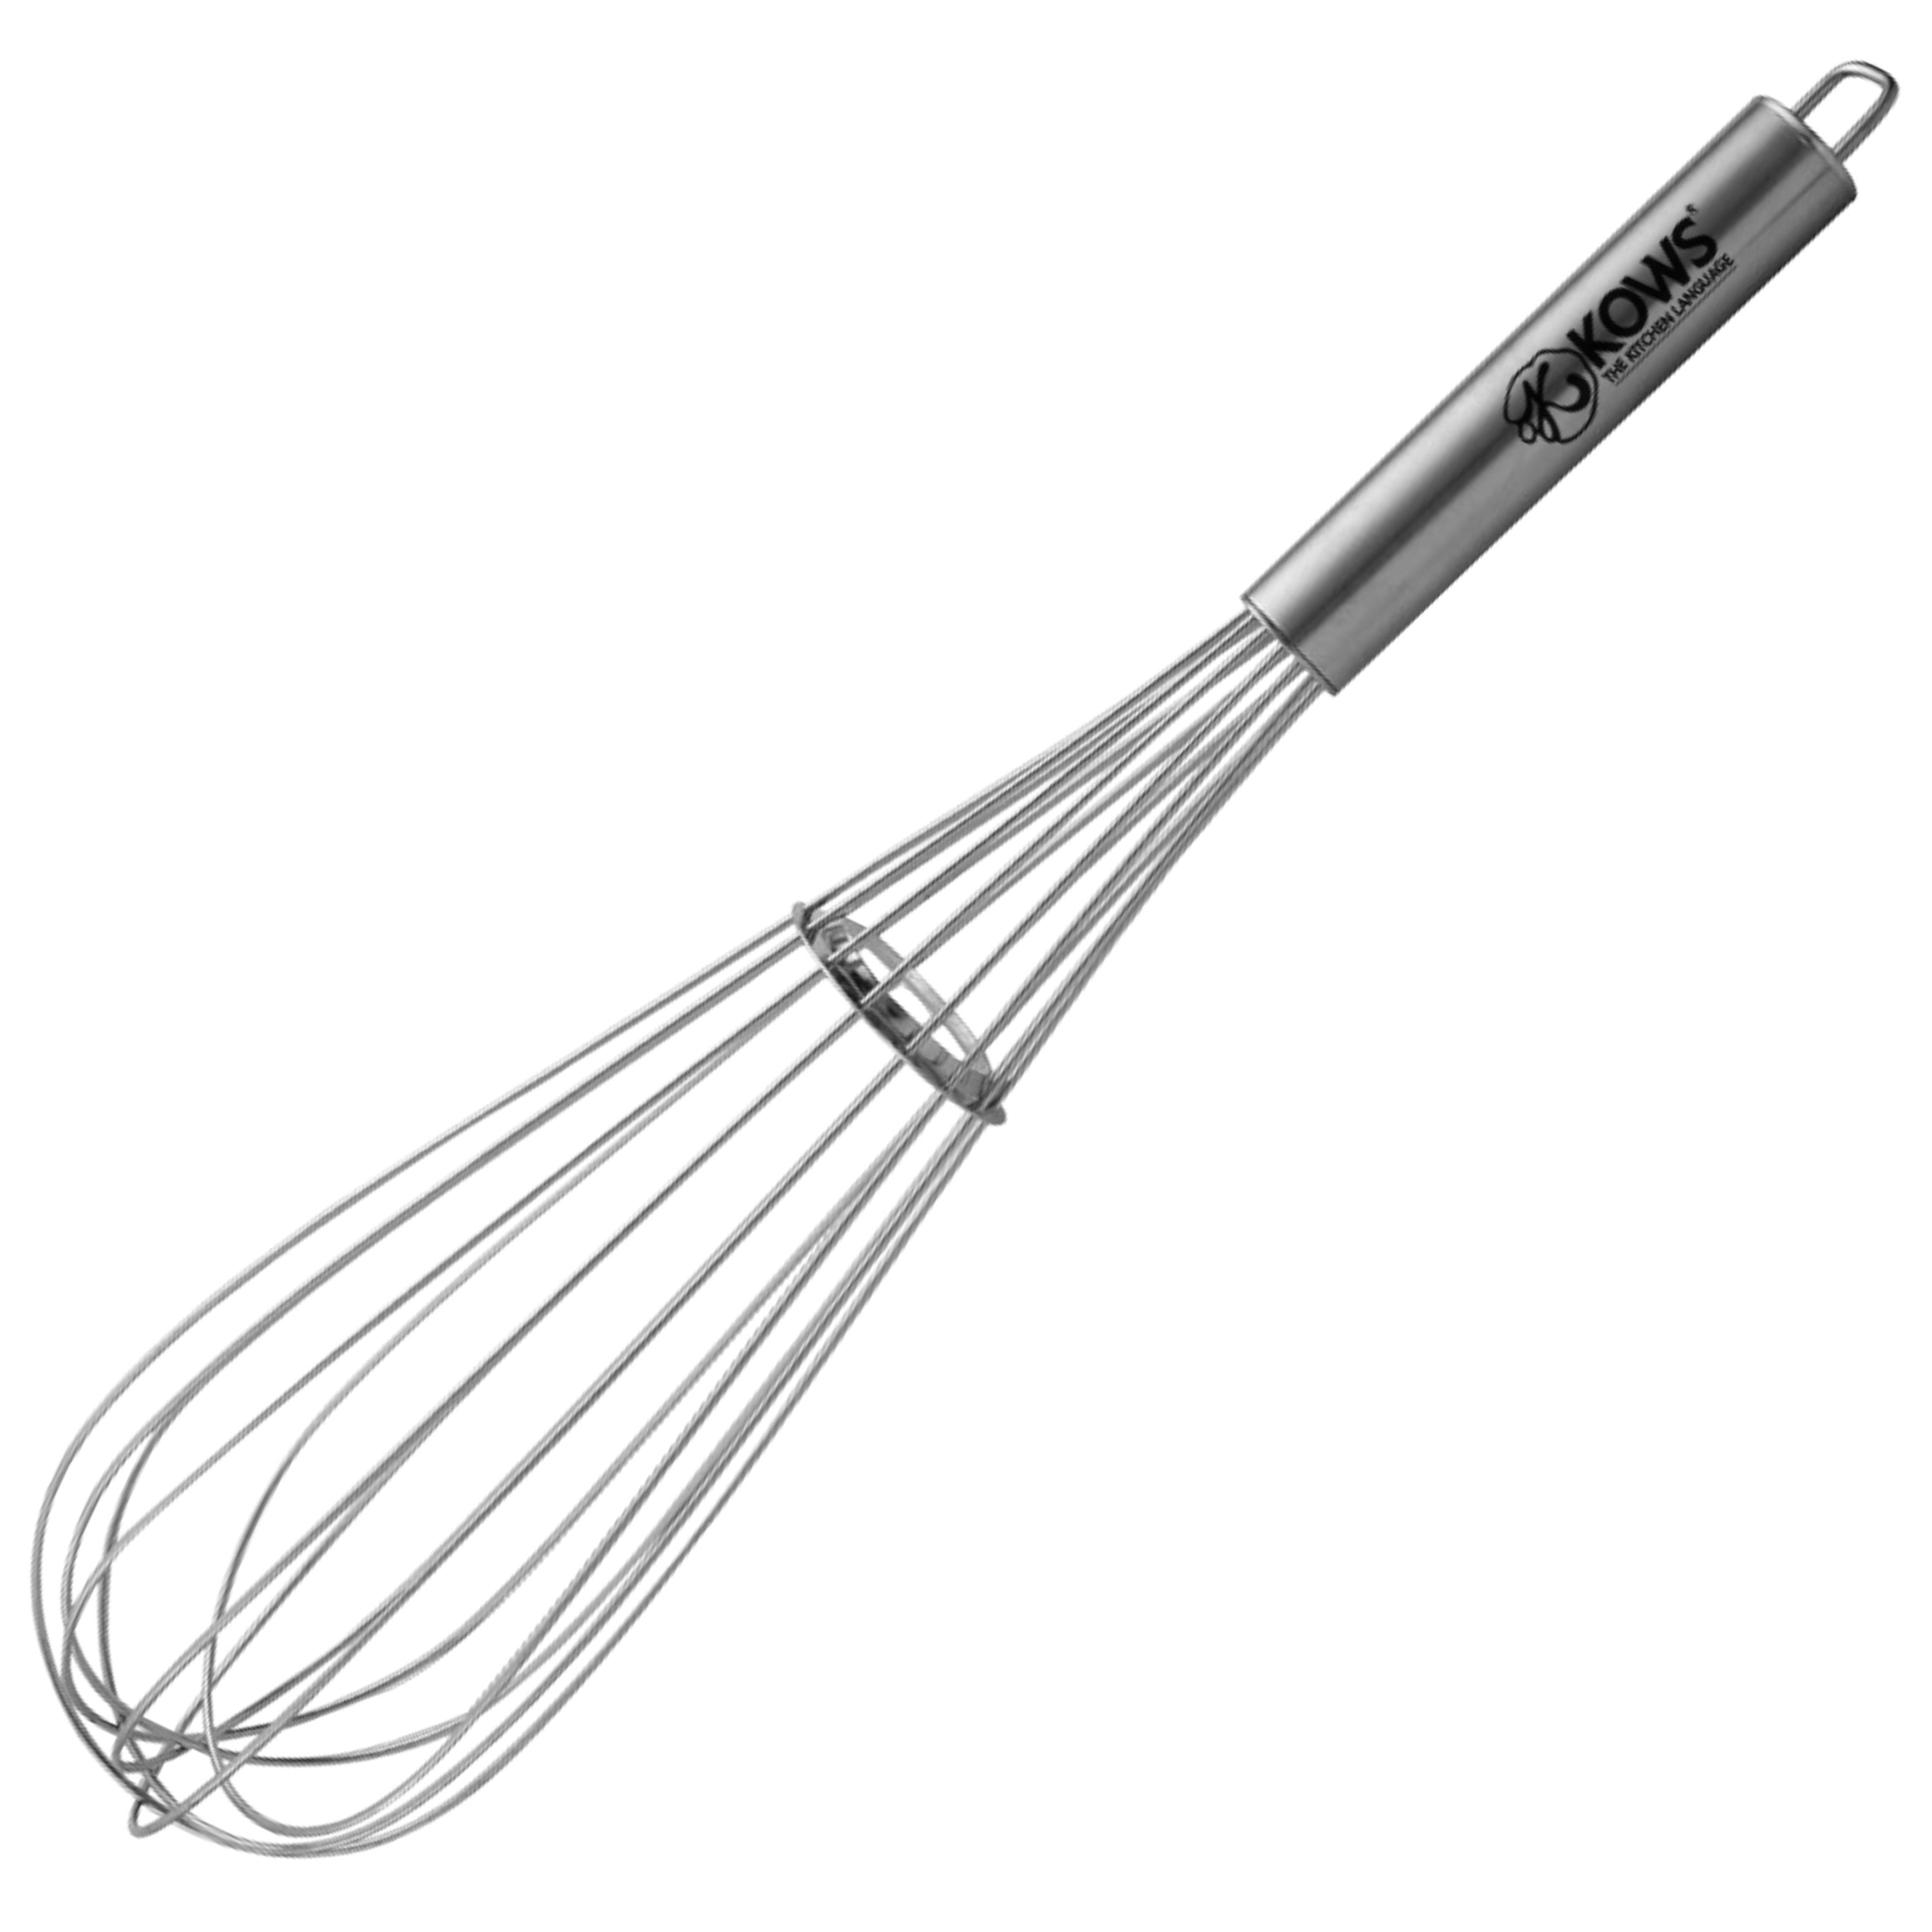 KOWS Pipe handle 1.4mm whisk 30 cm (WK0011)